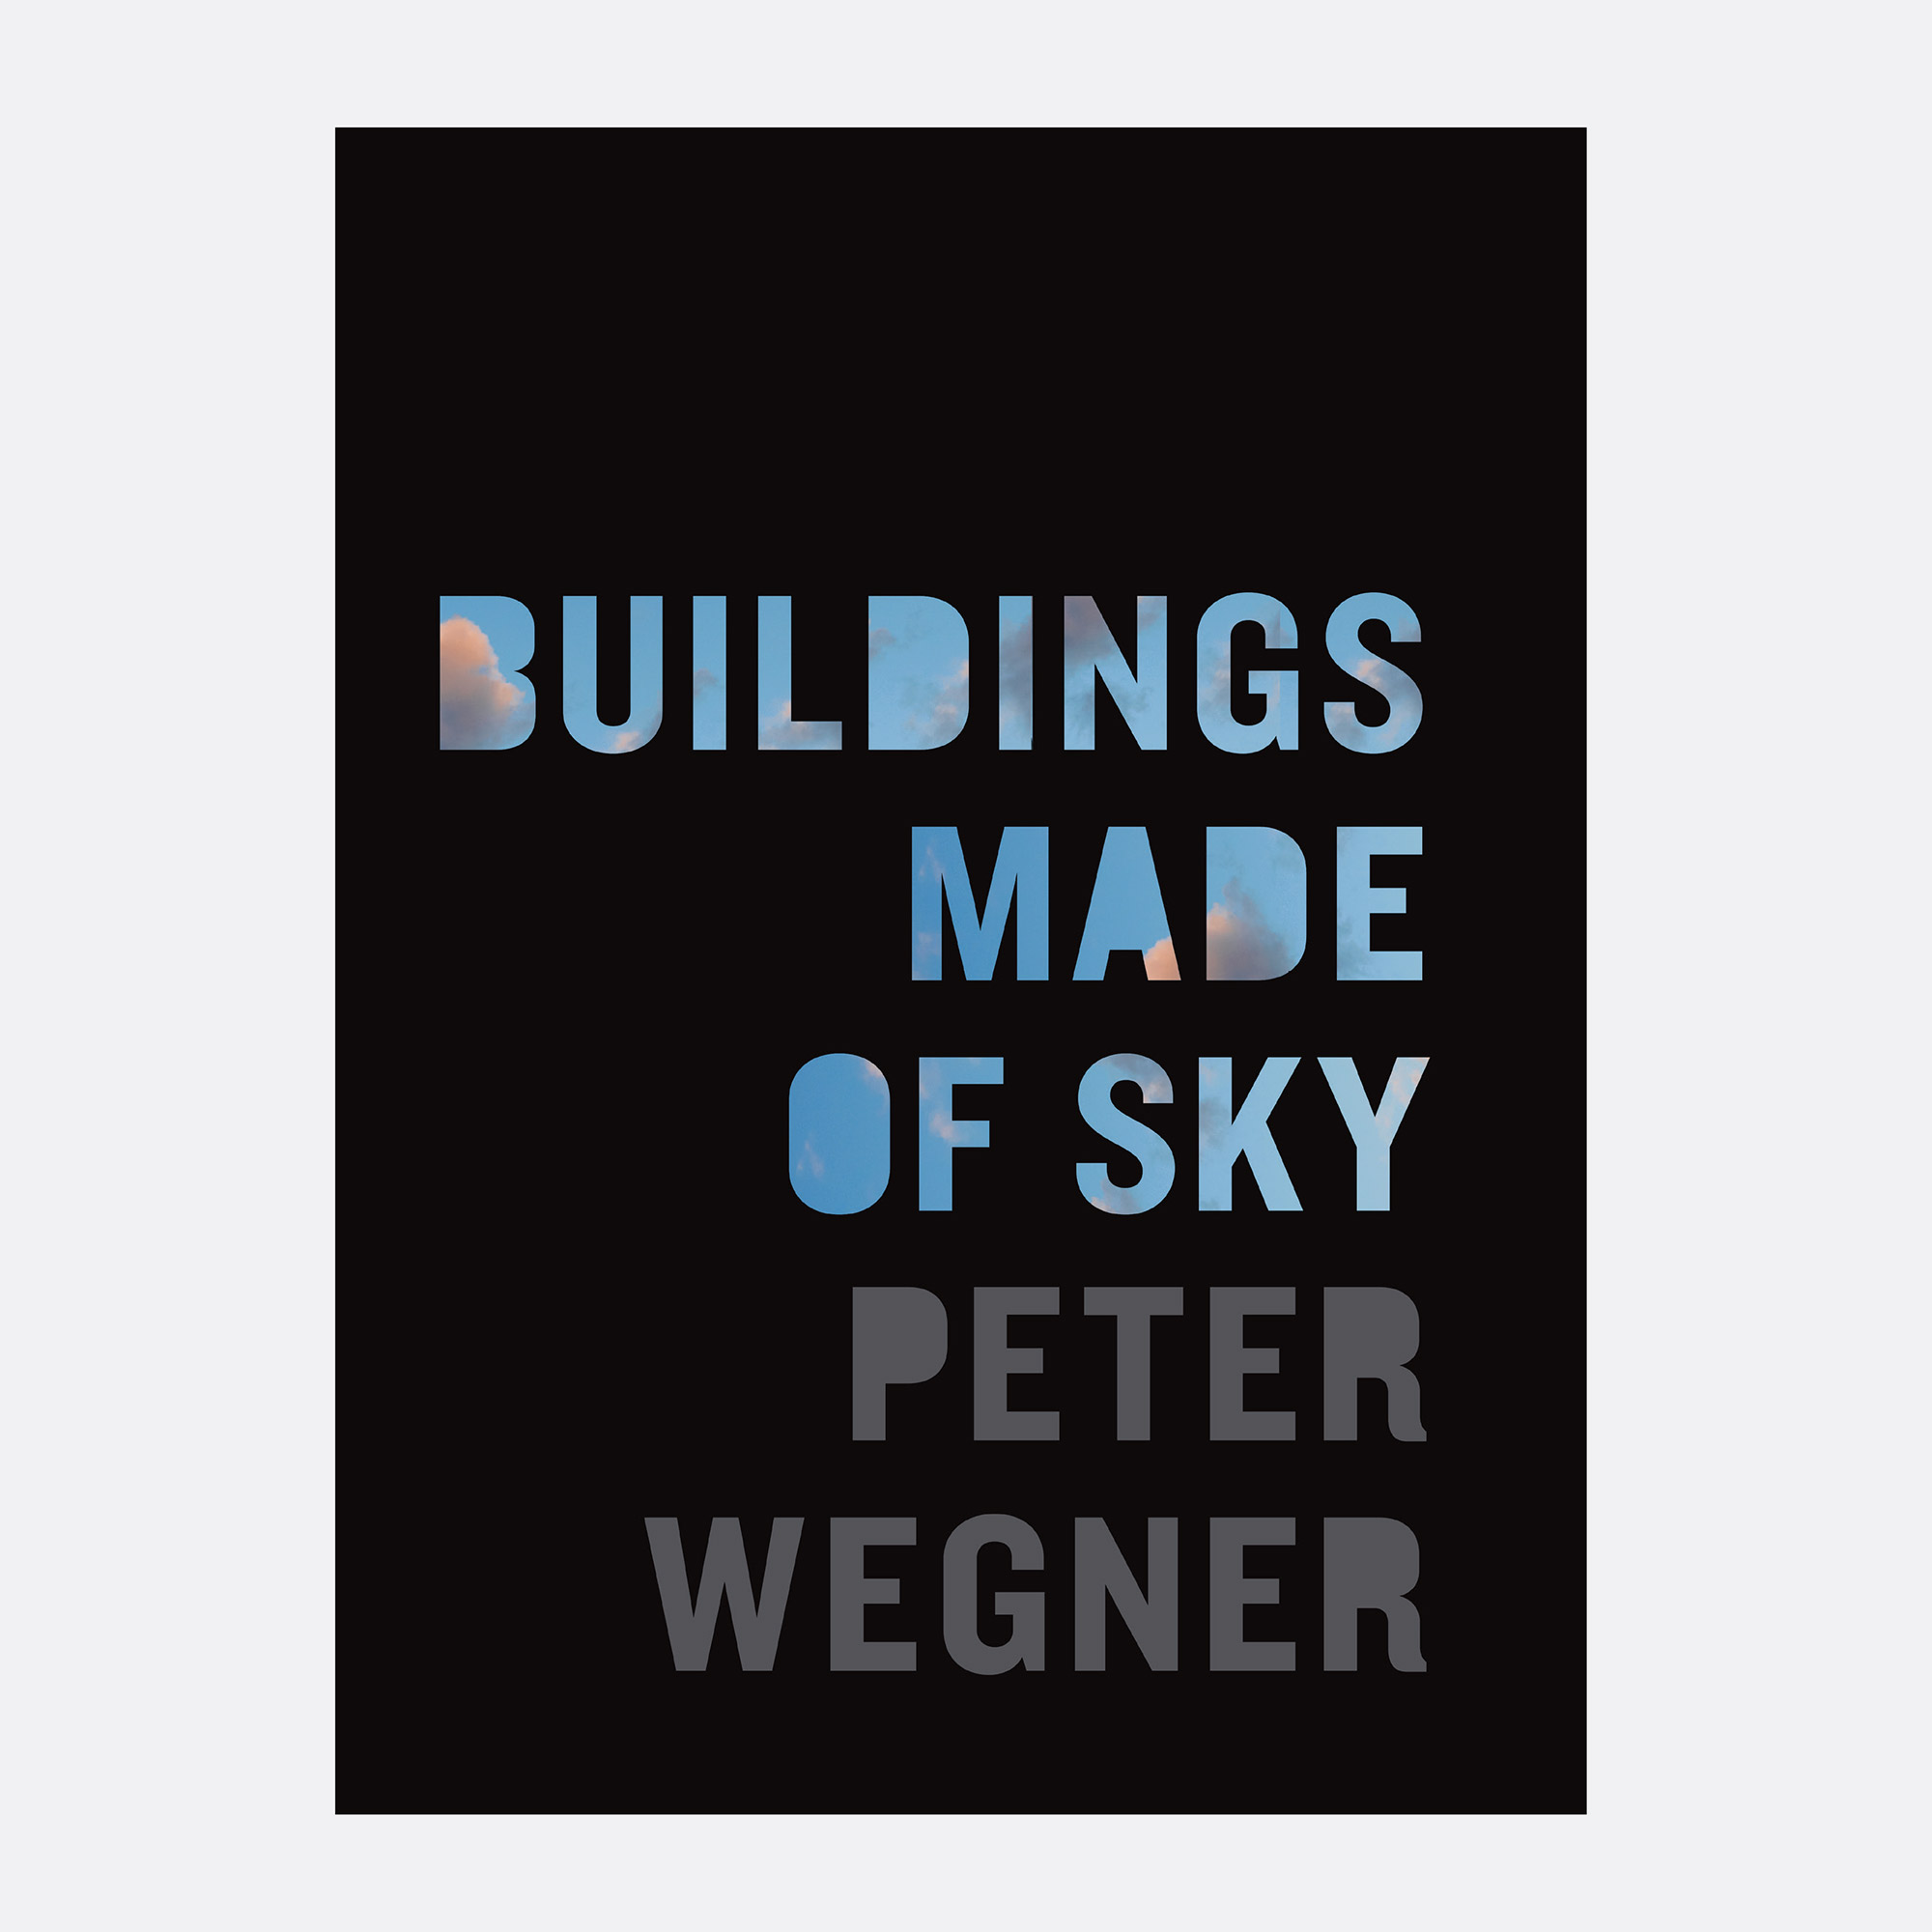 PHOTOGRAPHY (BUILDINGS MADE OF SKY)